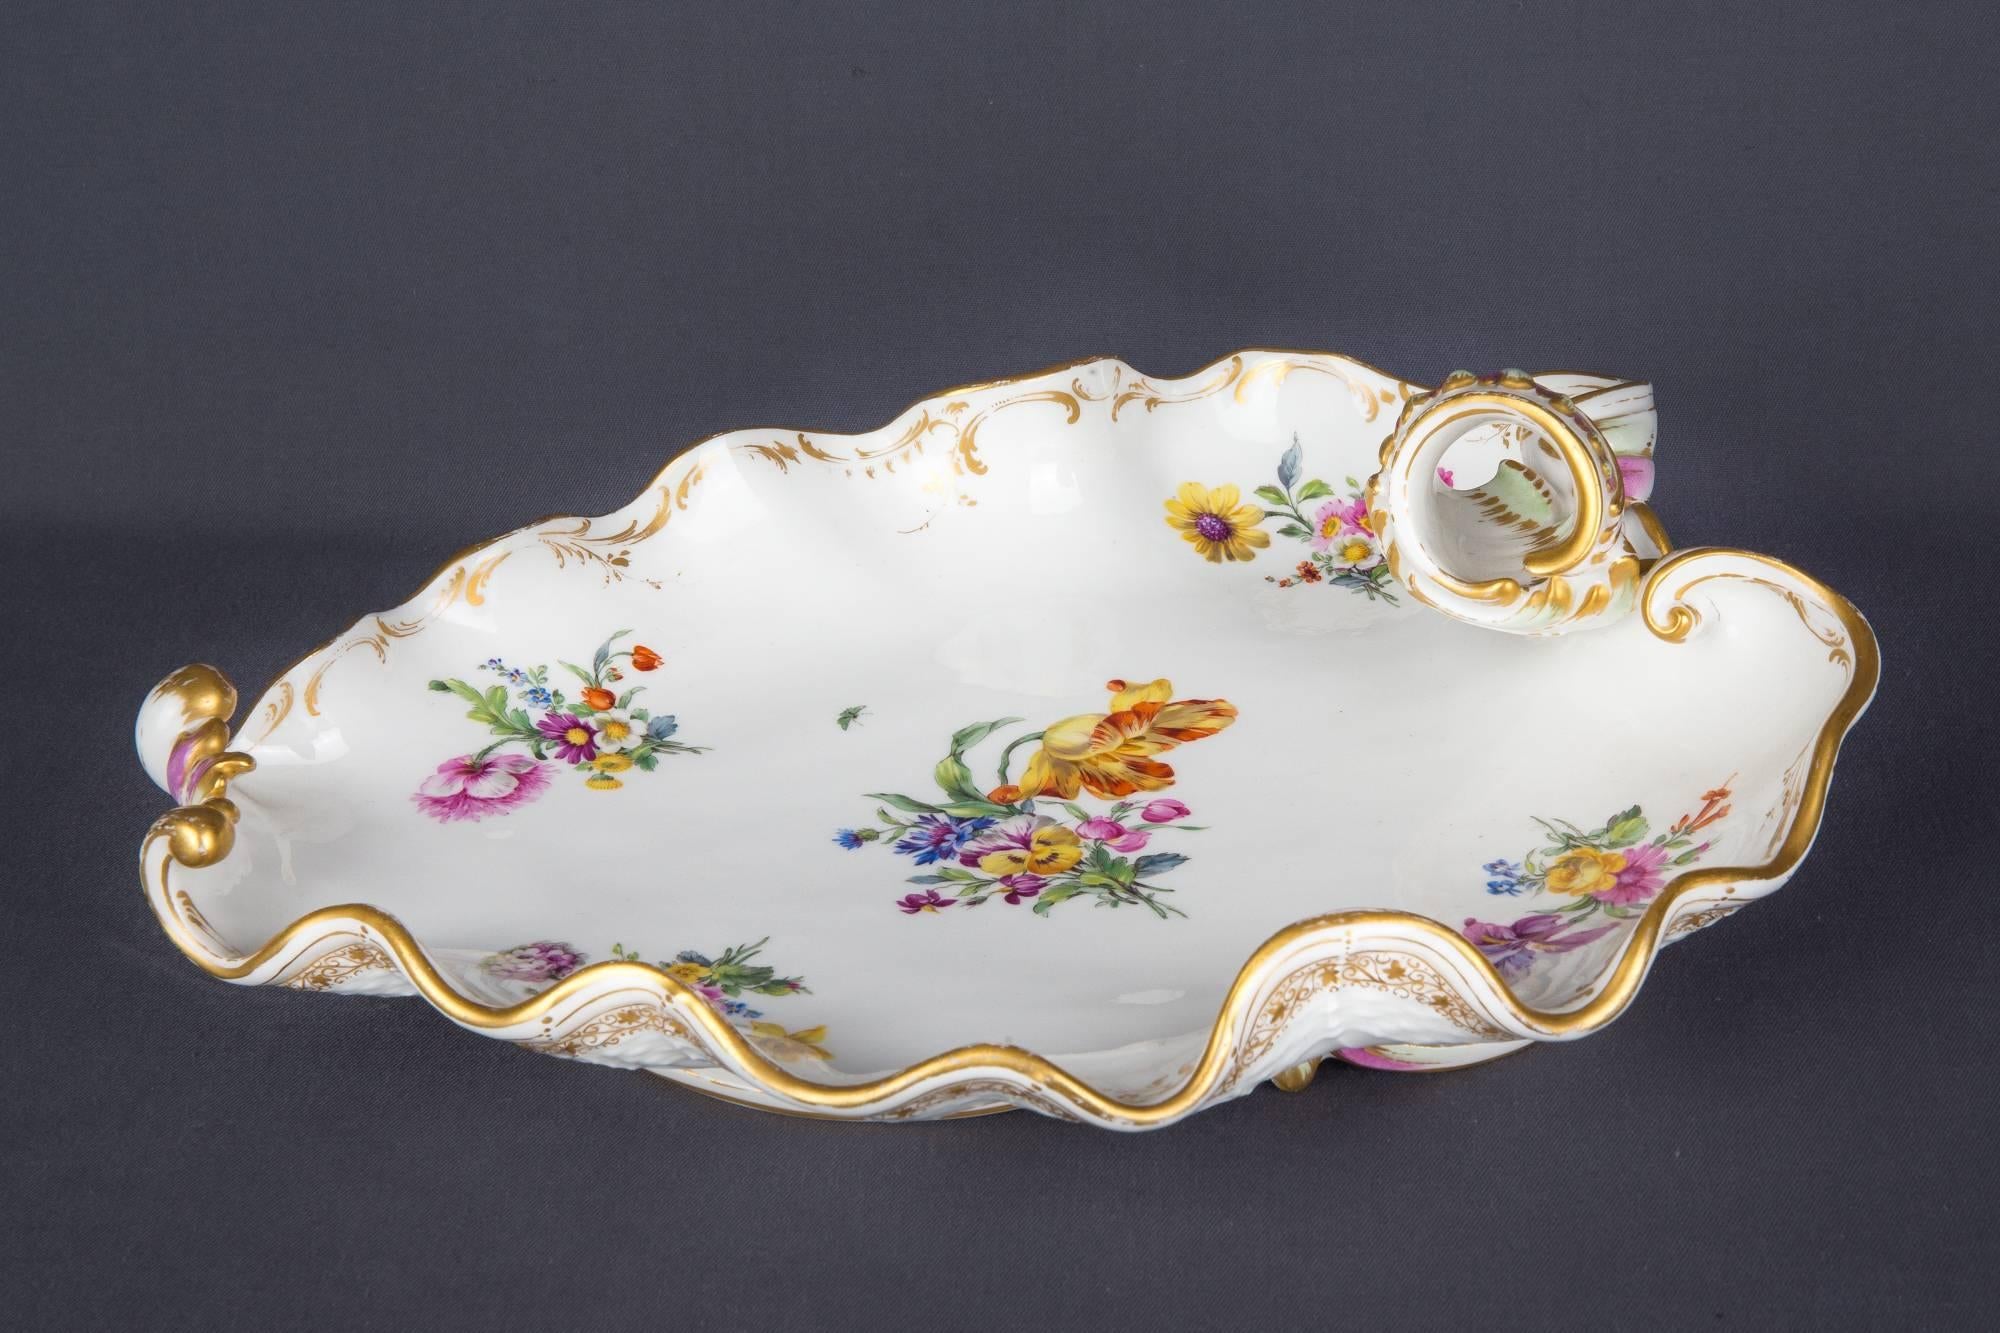 German Huge KPM Berlin Bowl with a Lot of Flowers and Very Much Gold